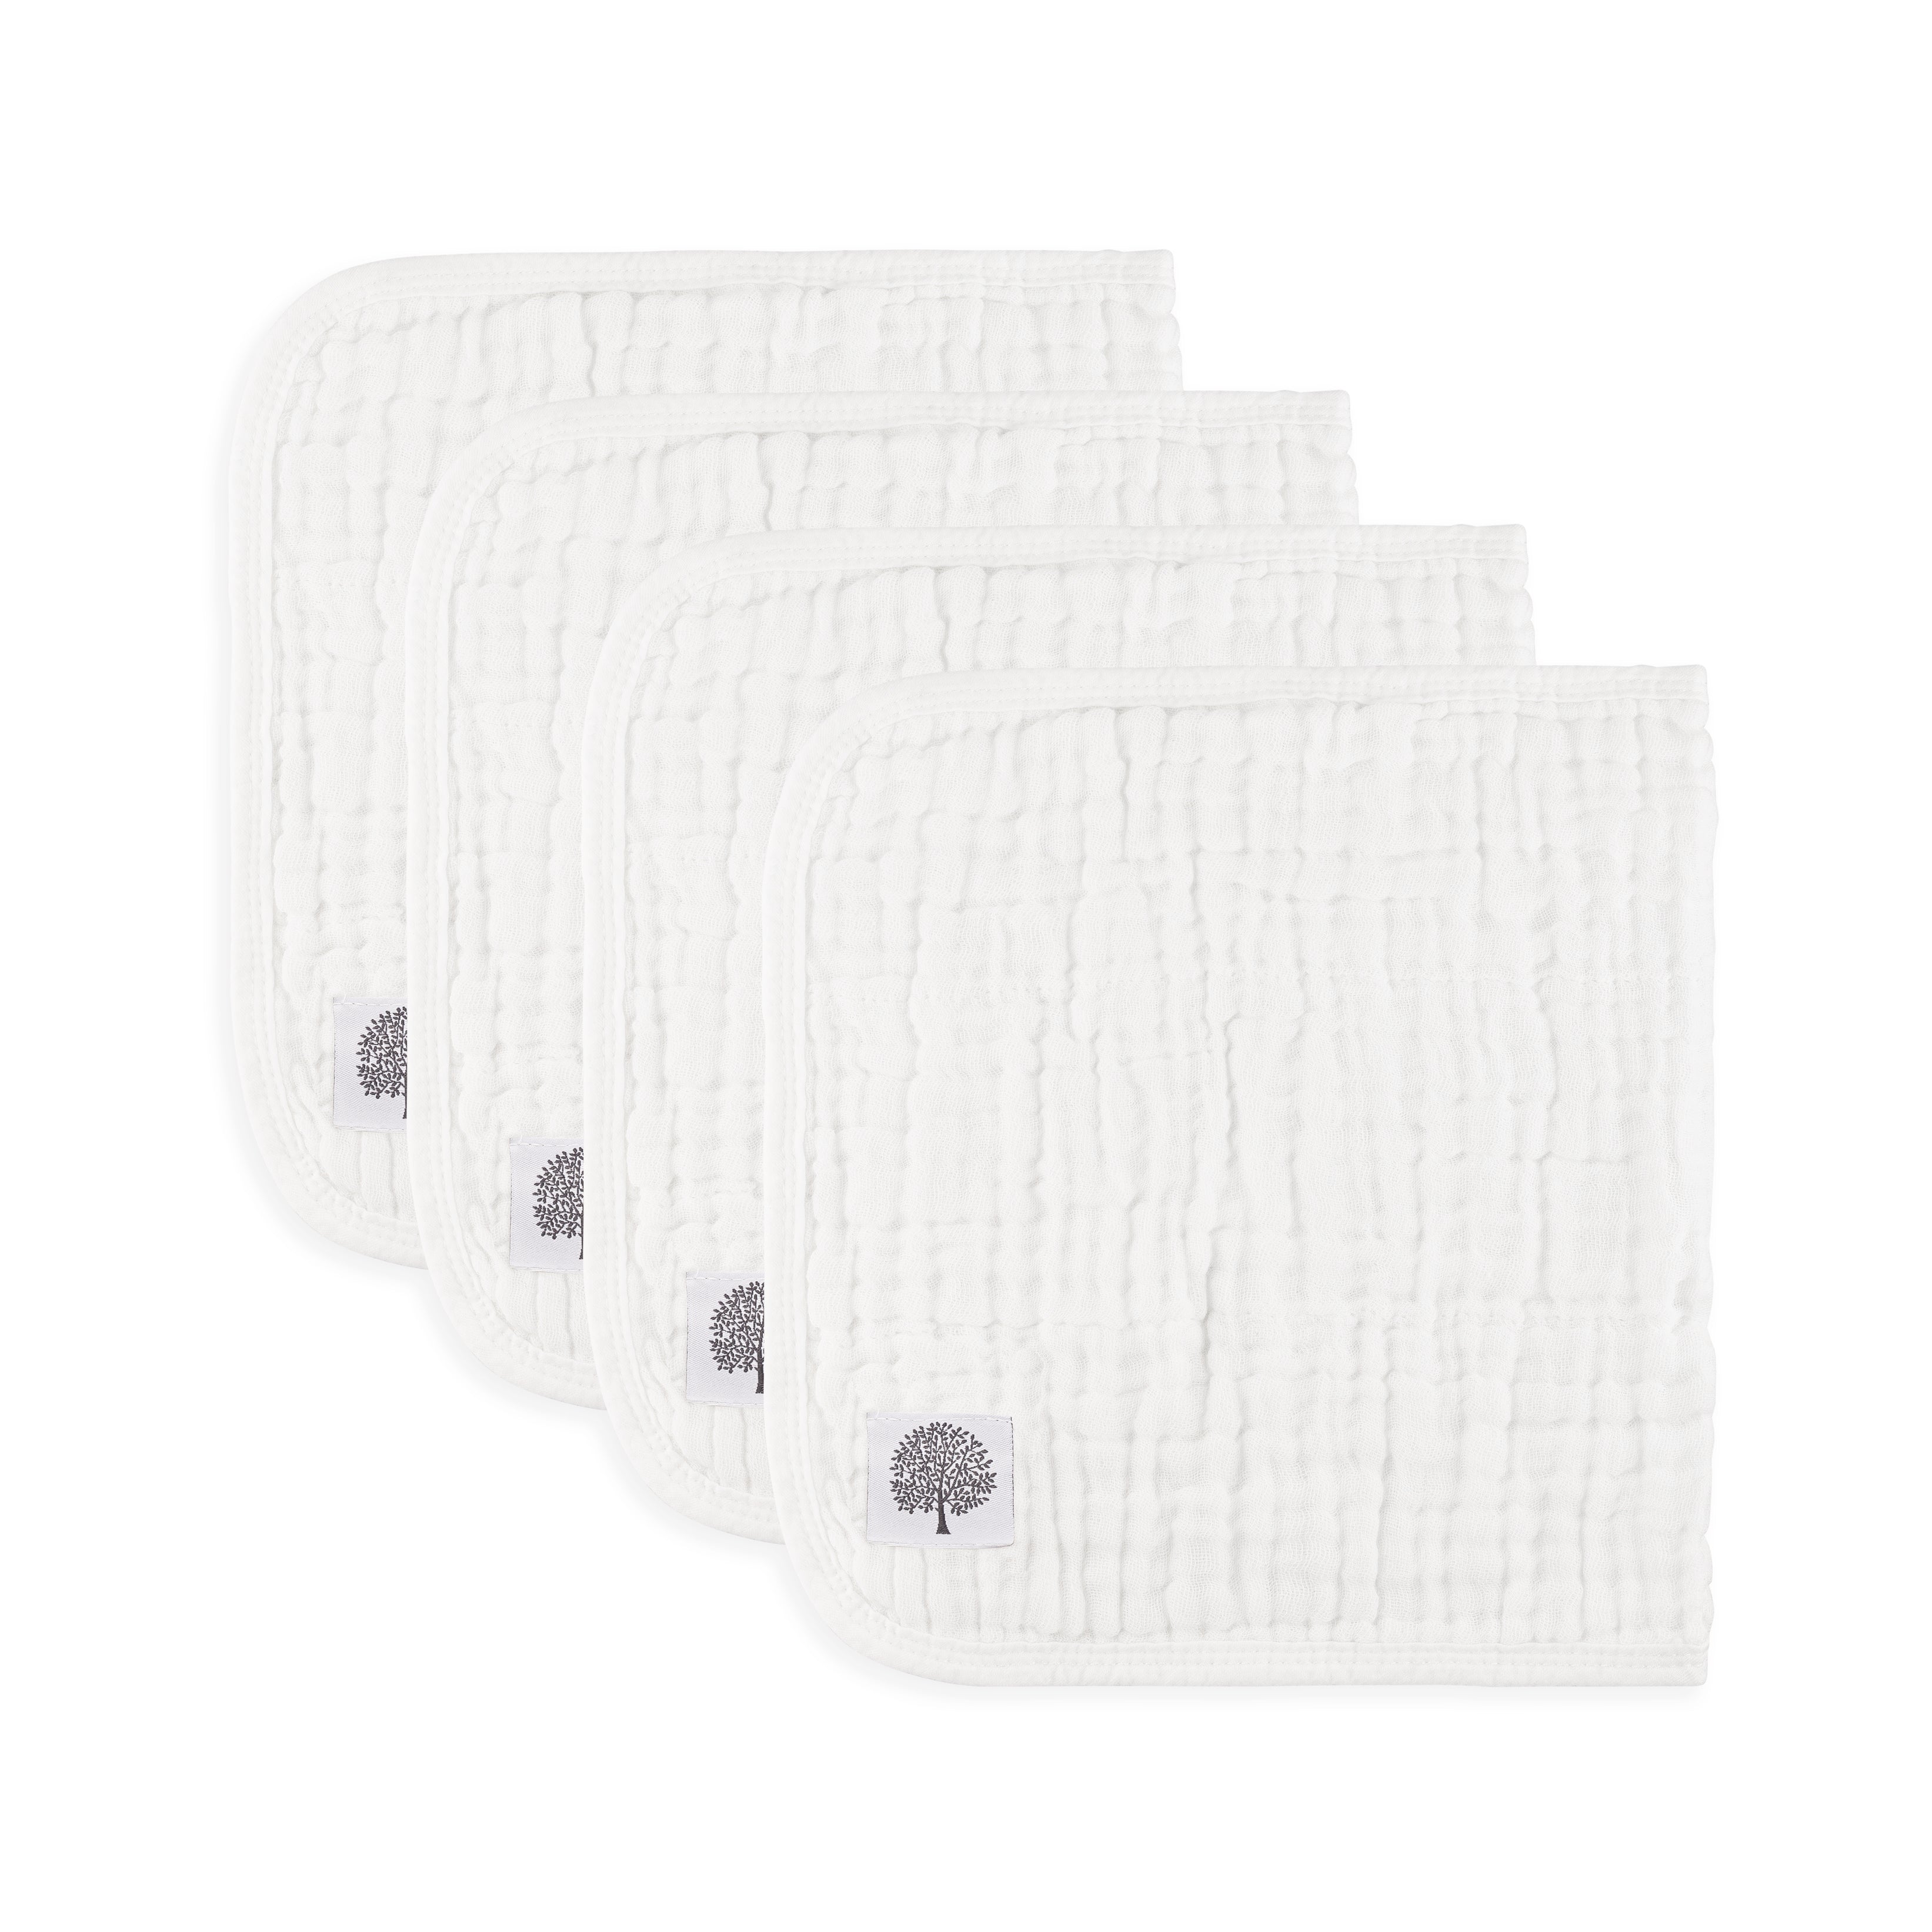 6 / 12 Pack Hight Quality 6 Layers Cotton Gauze Baby Face Towel